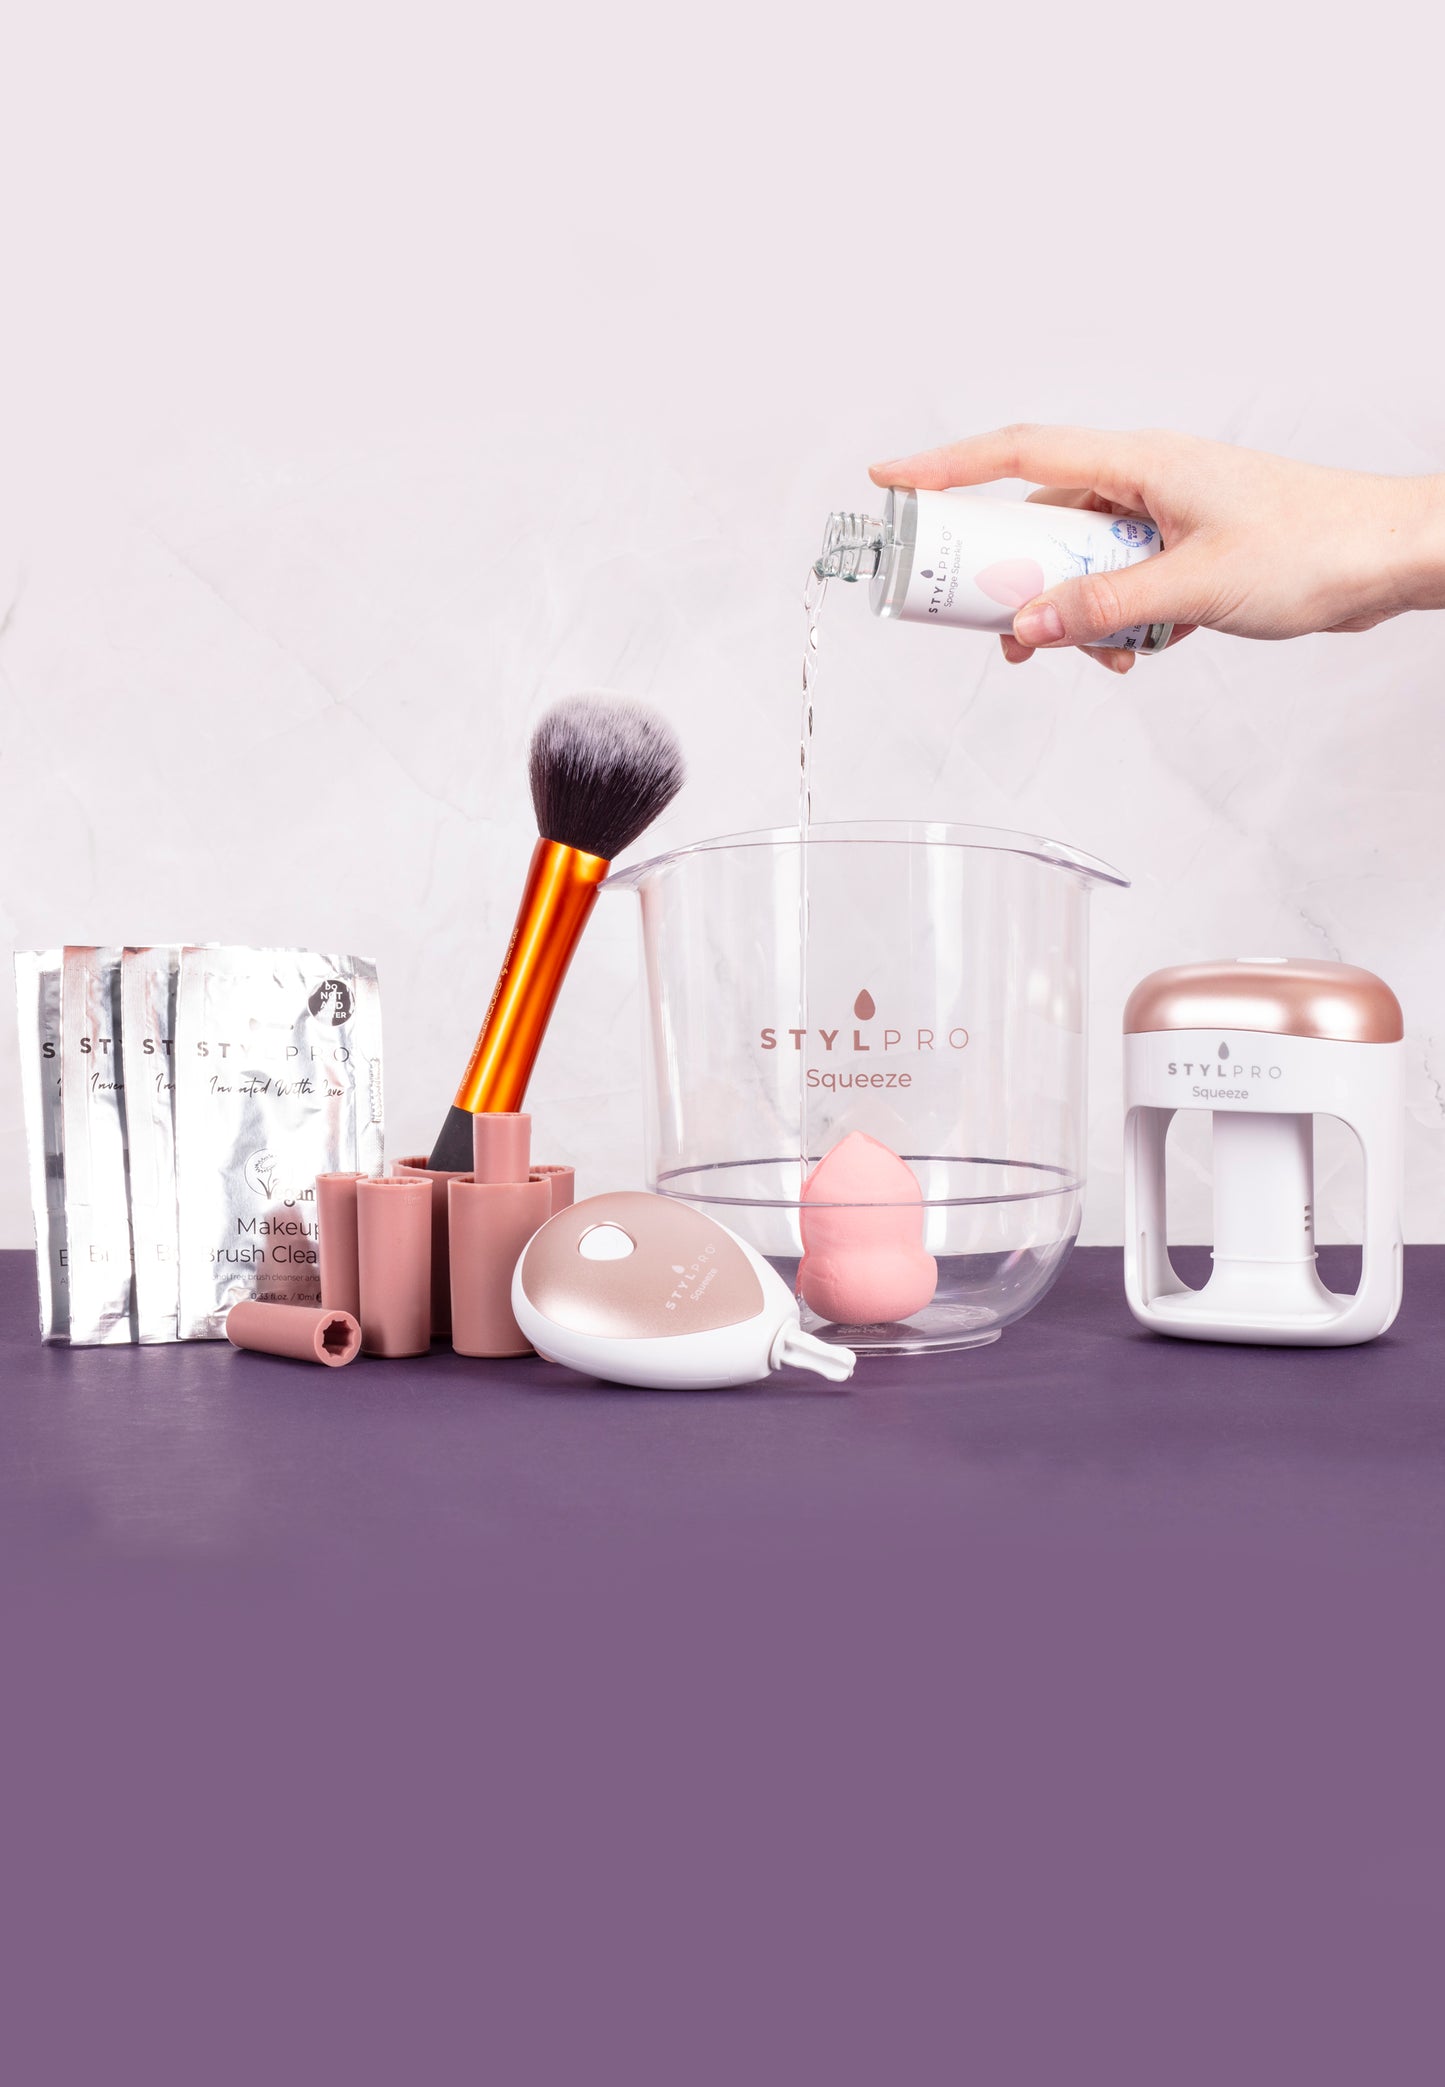 Spin & Squeeze Makeup Brush & Sponge Cleaner